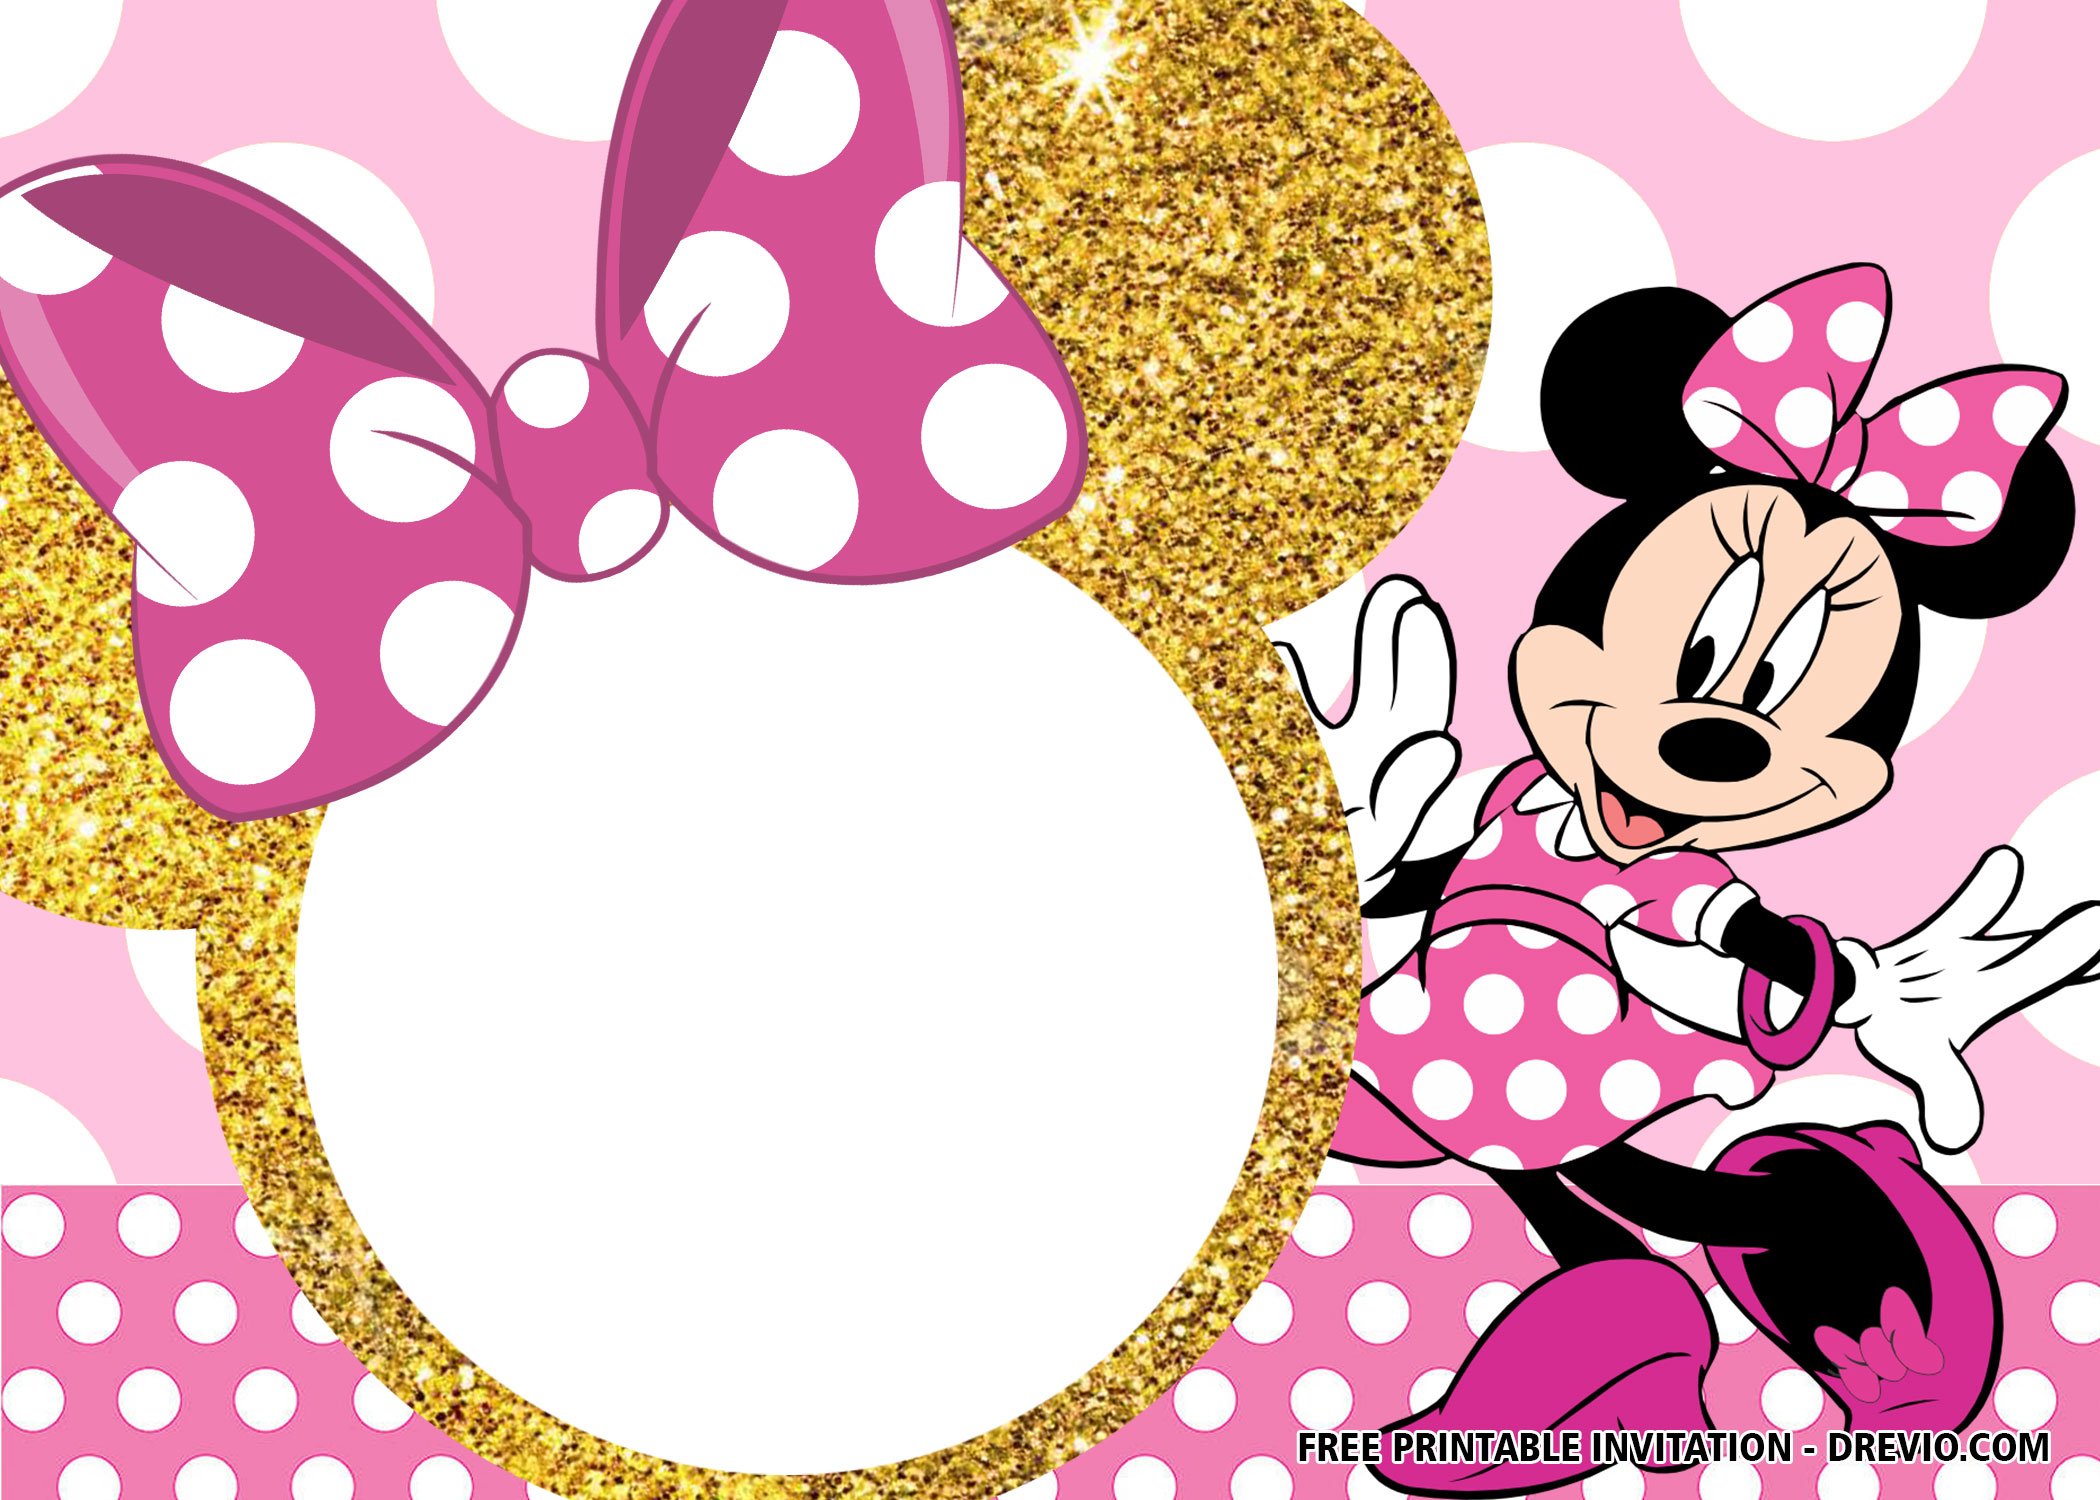 FREE Pink and Gold Minnie Mouse Invitation Templates FREE Printable